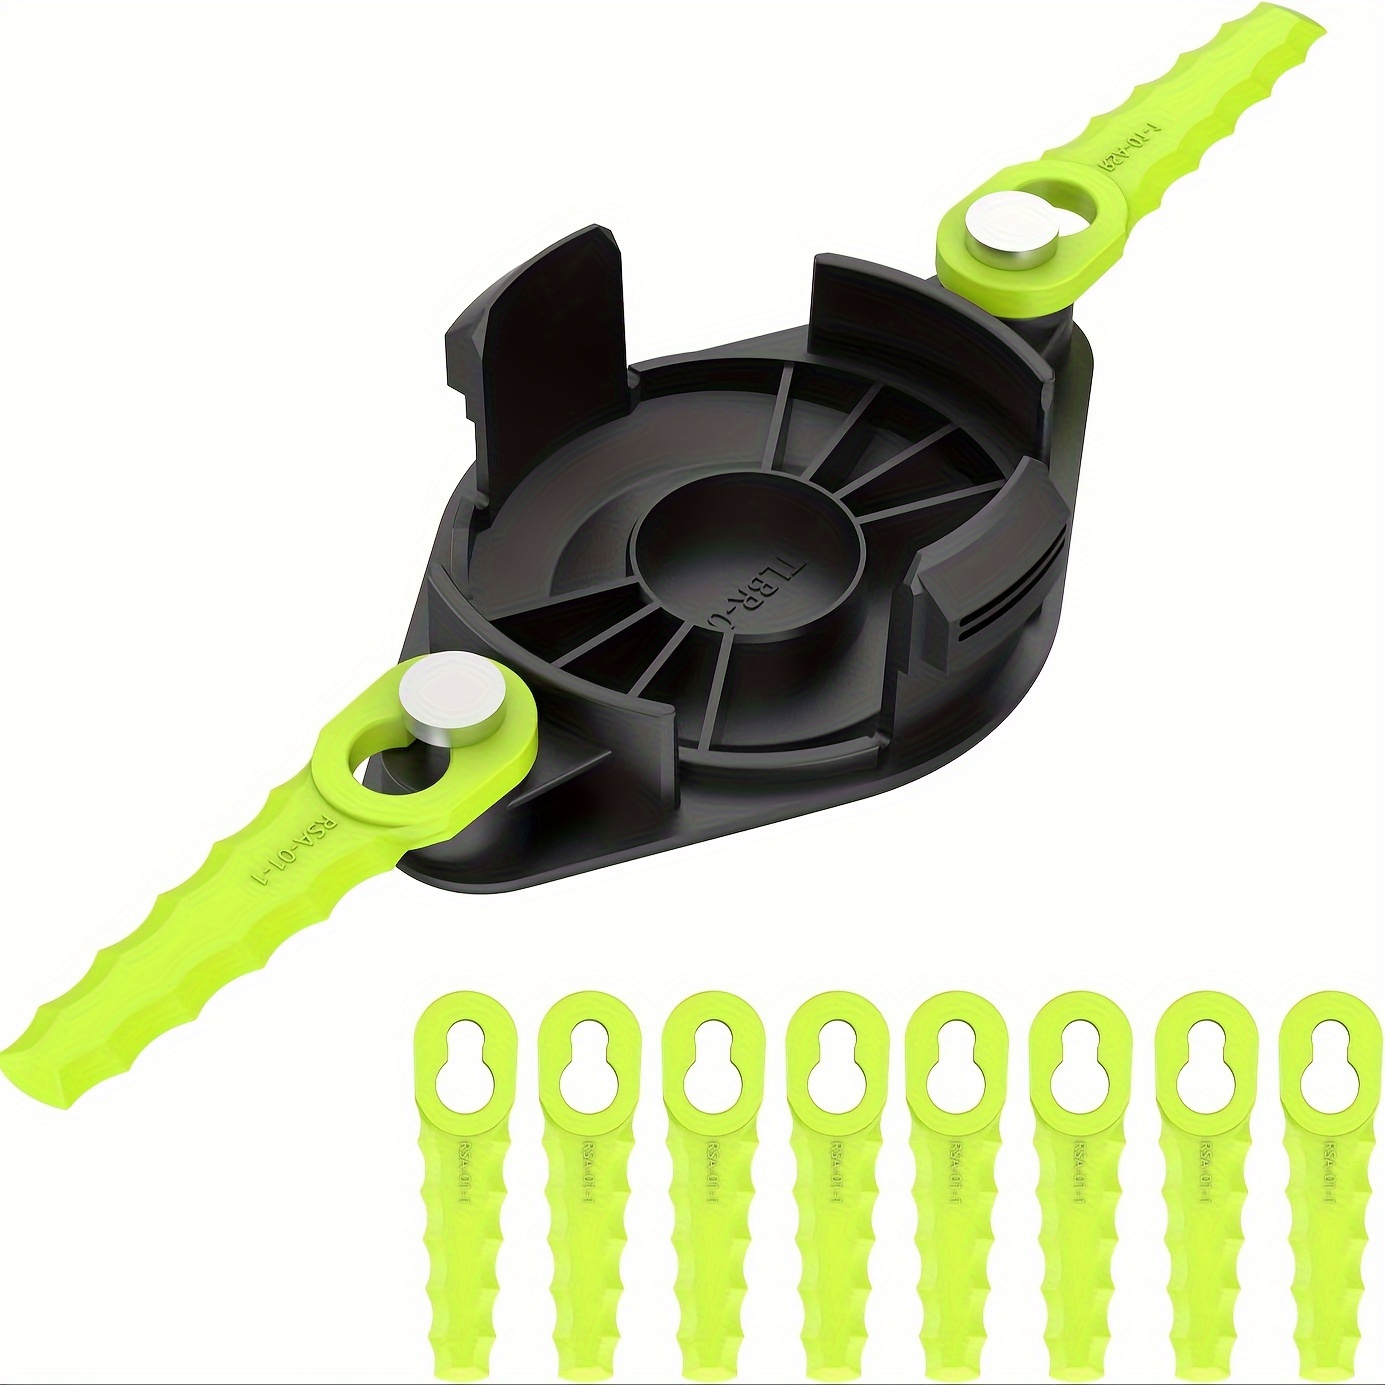 

Bladed Trimmer Head With 10 Replacement Blades - Compatible With 18v, 24v, 40v String Trimmers - Easy Installation Polycarbonate Trimmer Head Replacement For Acfhrl2